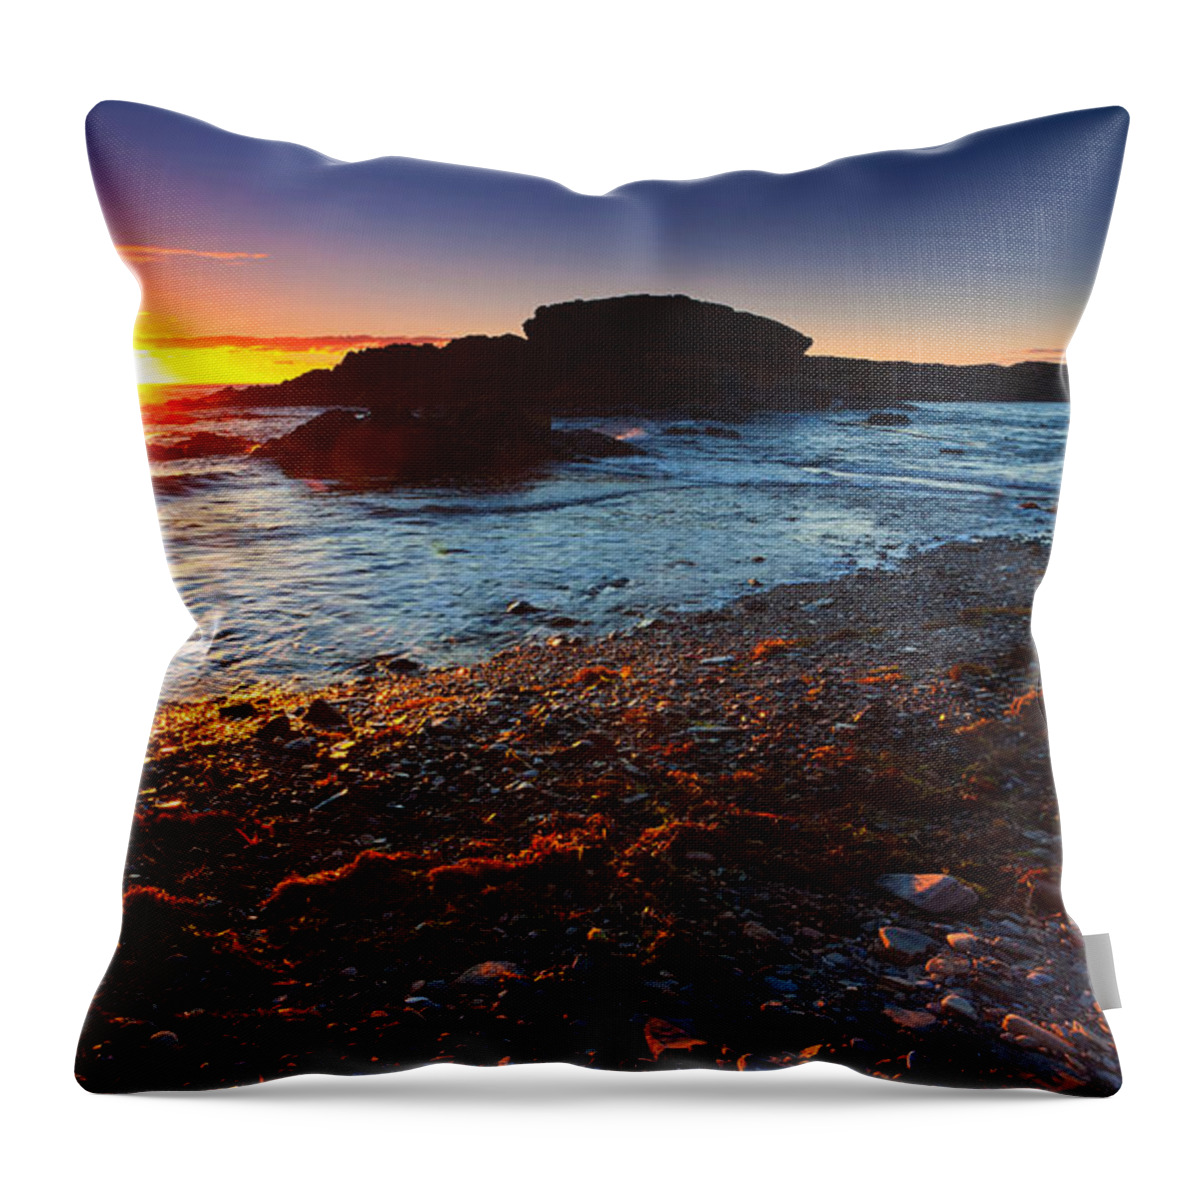 Second Valley Sunset Seascape South Australia Australian Coastal Sea Shoreline Coast Seaweed Pebbles Throw Pillow featuring the photograph Second Valley Sunset by Bill Robinson